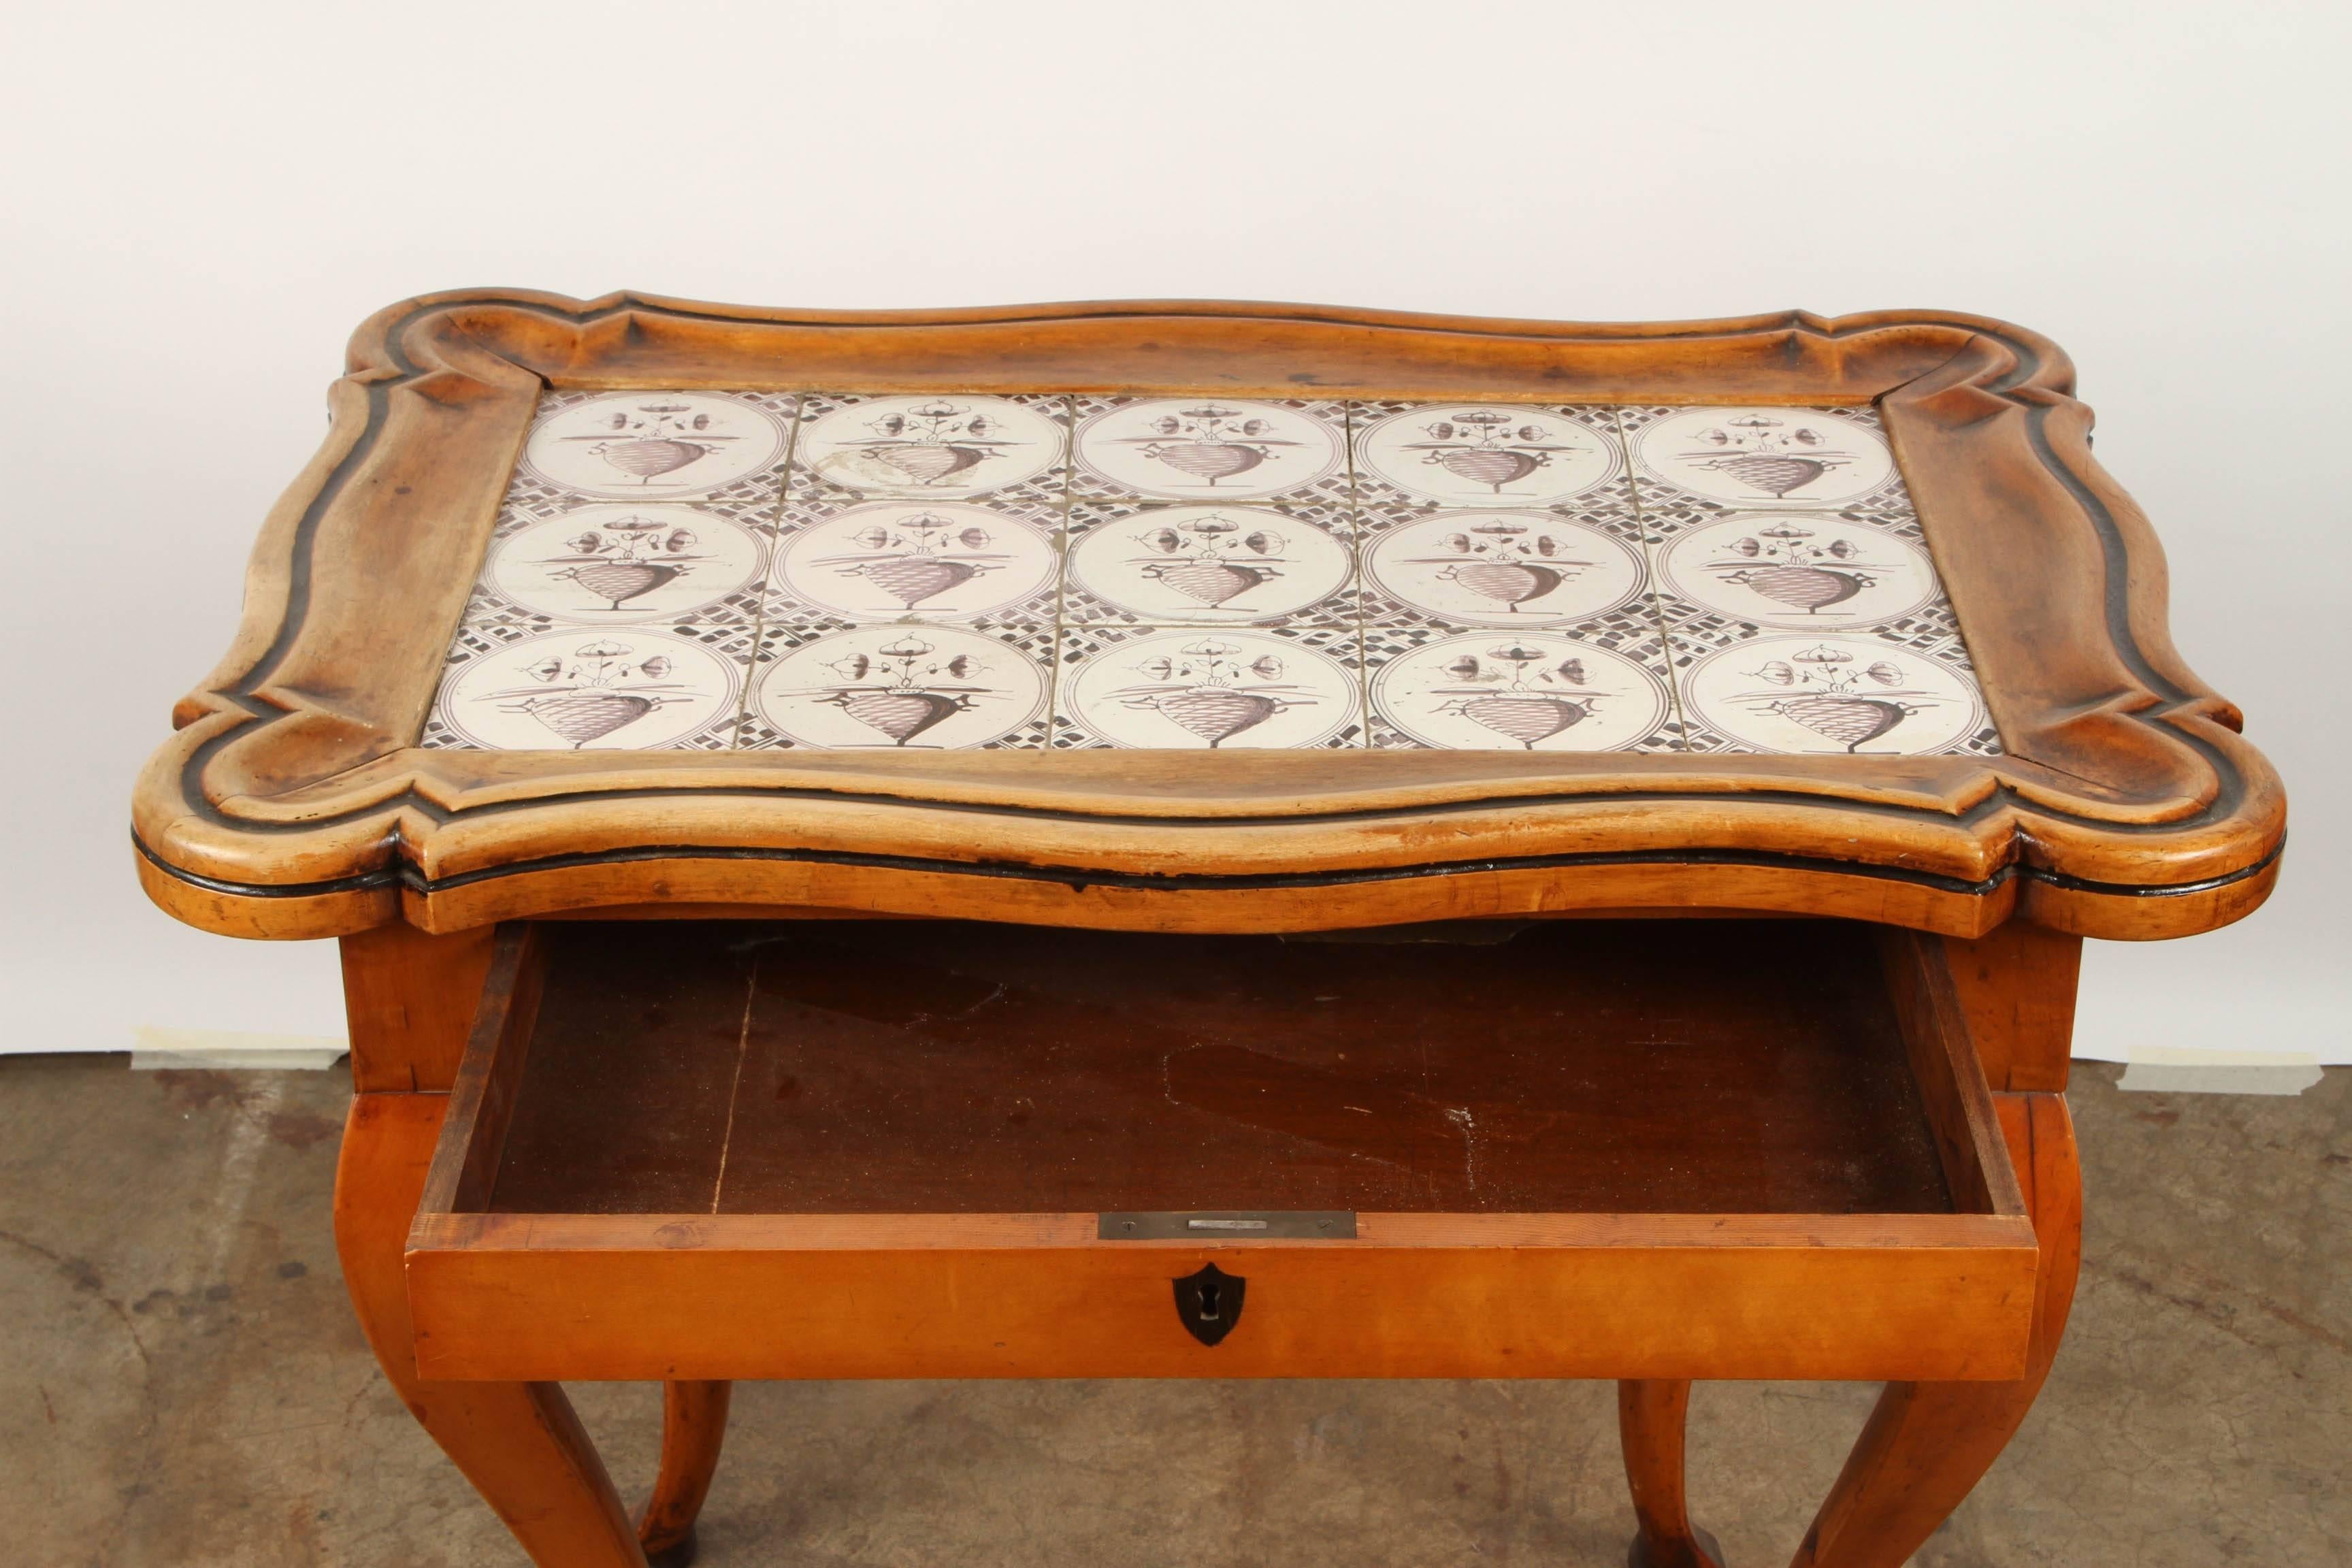 Northern German Rococo Style Table with Kellinghus Tile 1